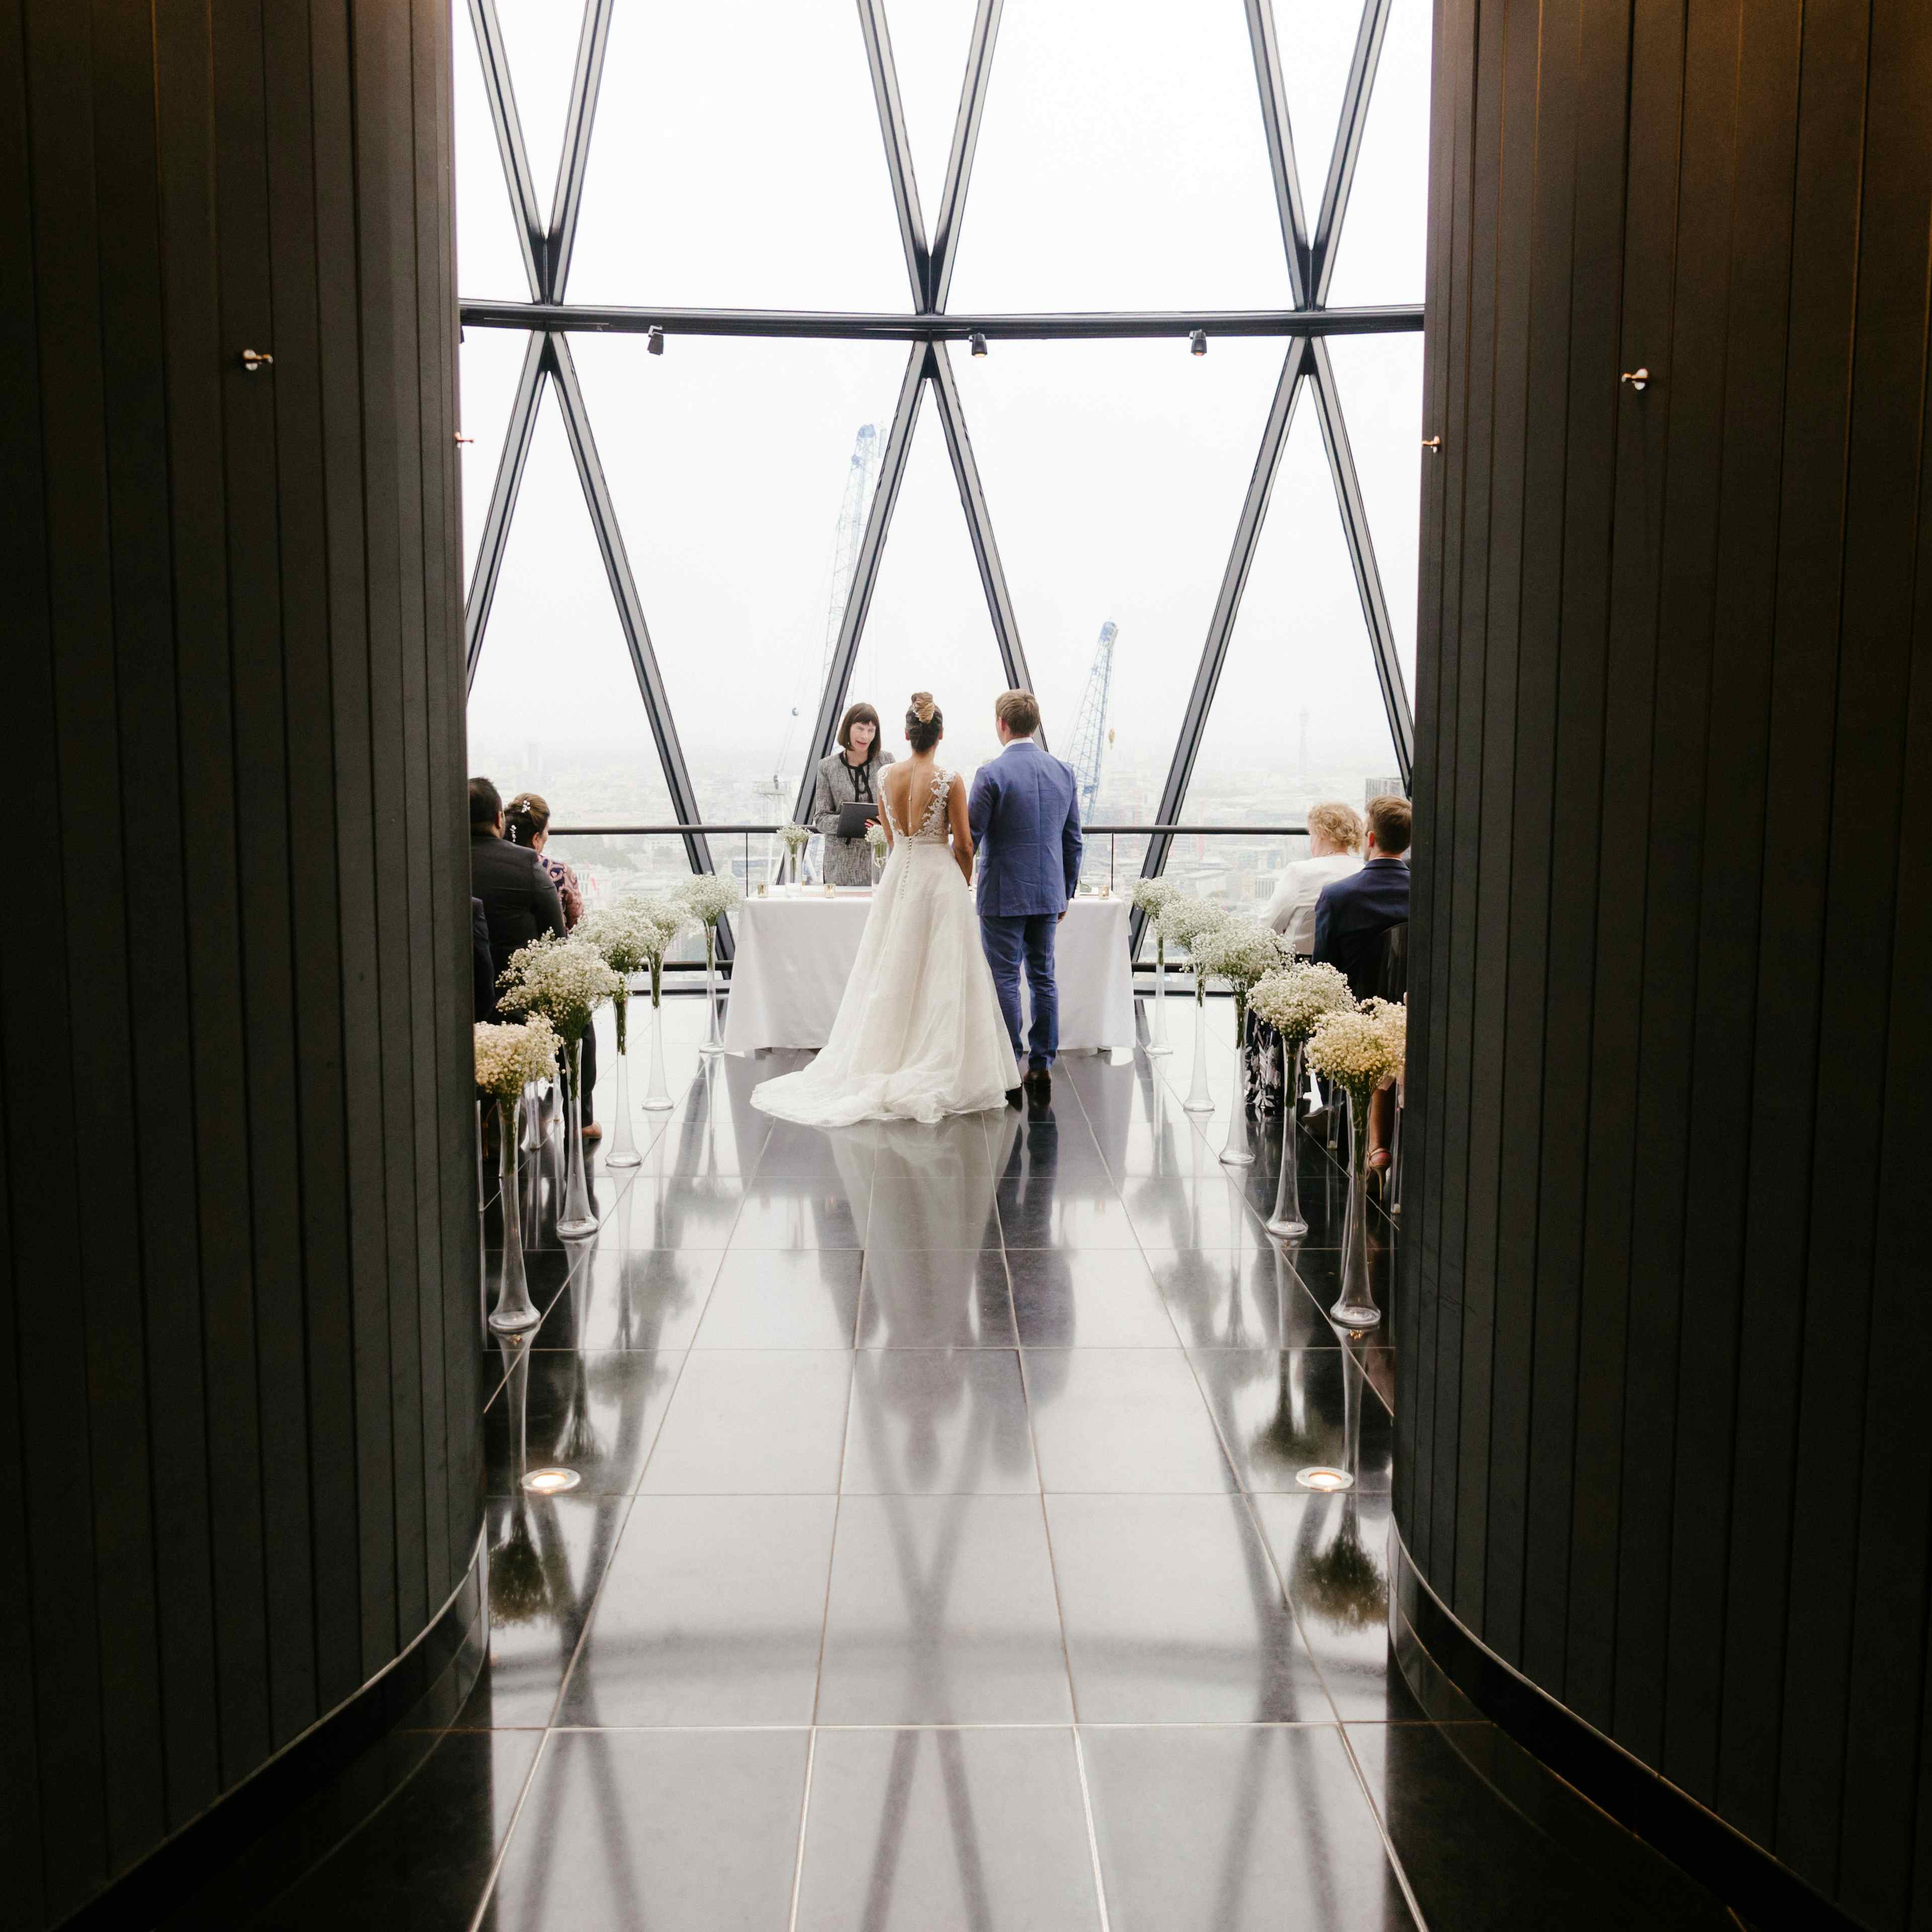 Searcys at the Gherkin - Exclusive hire of Helix and Iris image 2